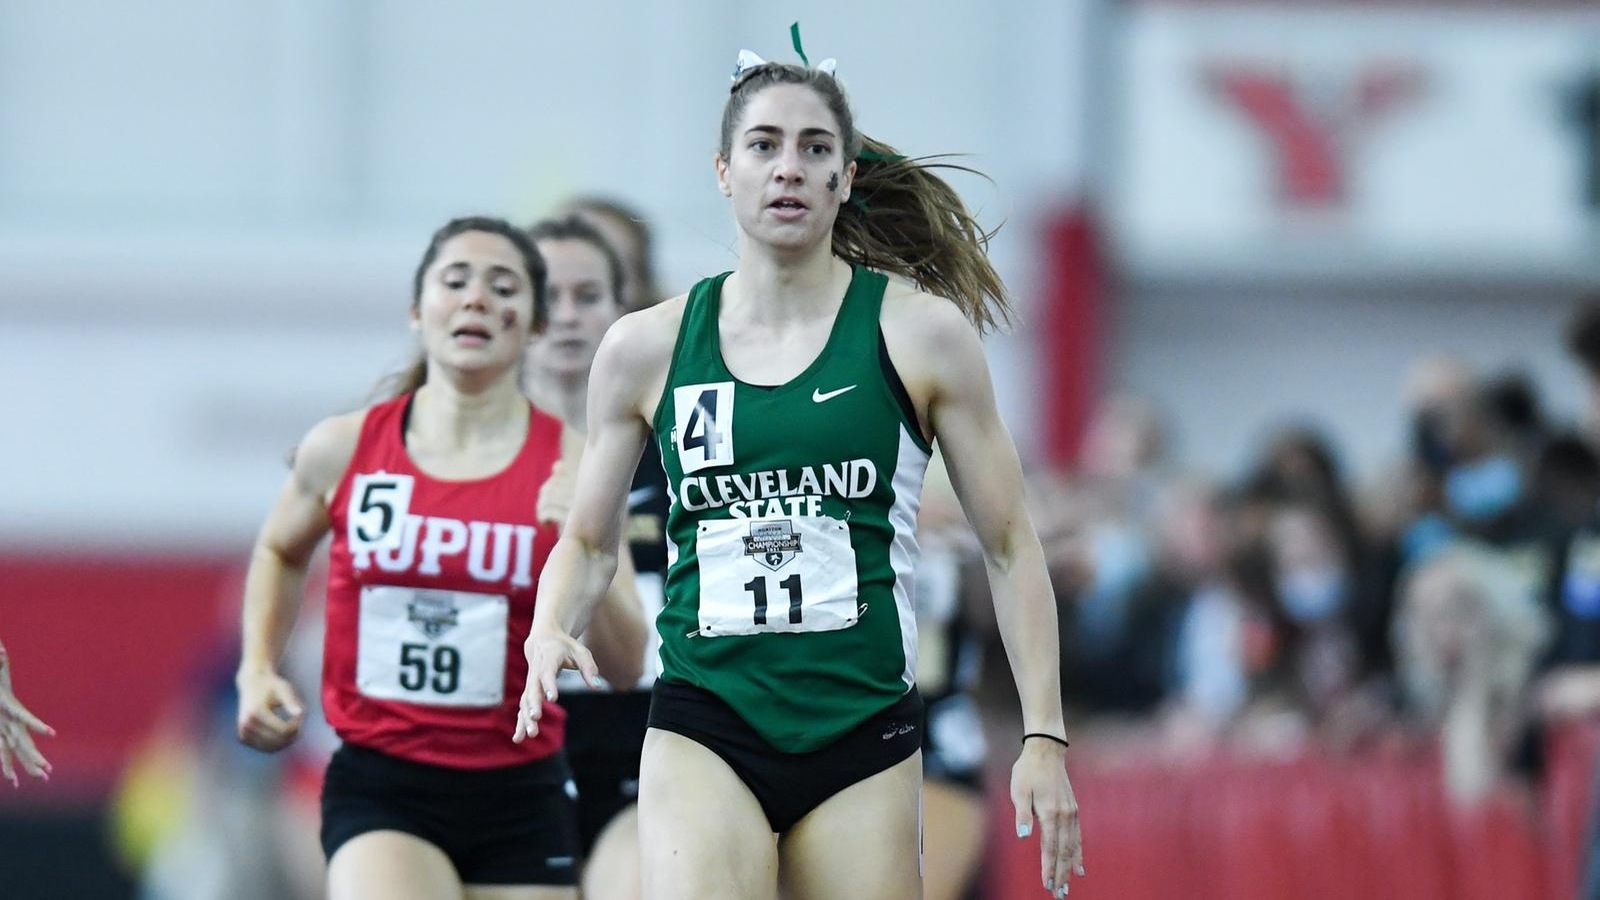 Cleveland State’s Brandt Earns Spot On #HLTF Outdoor All-Academic Team